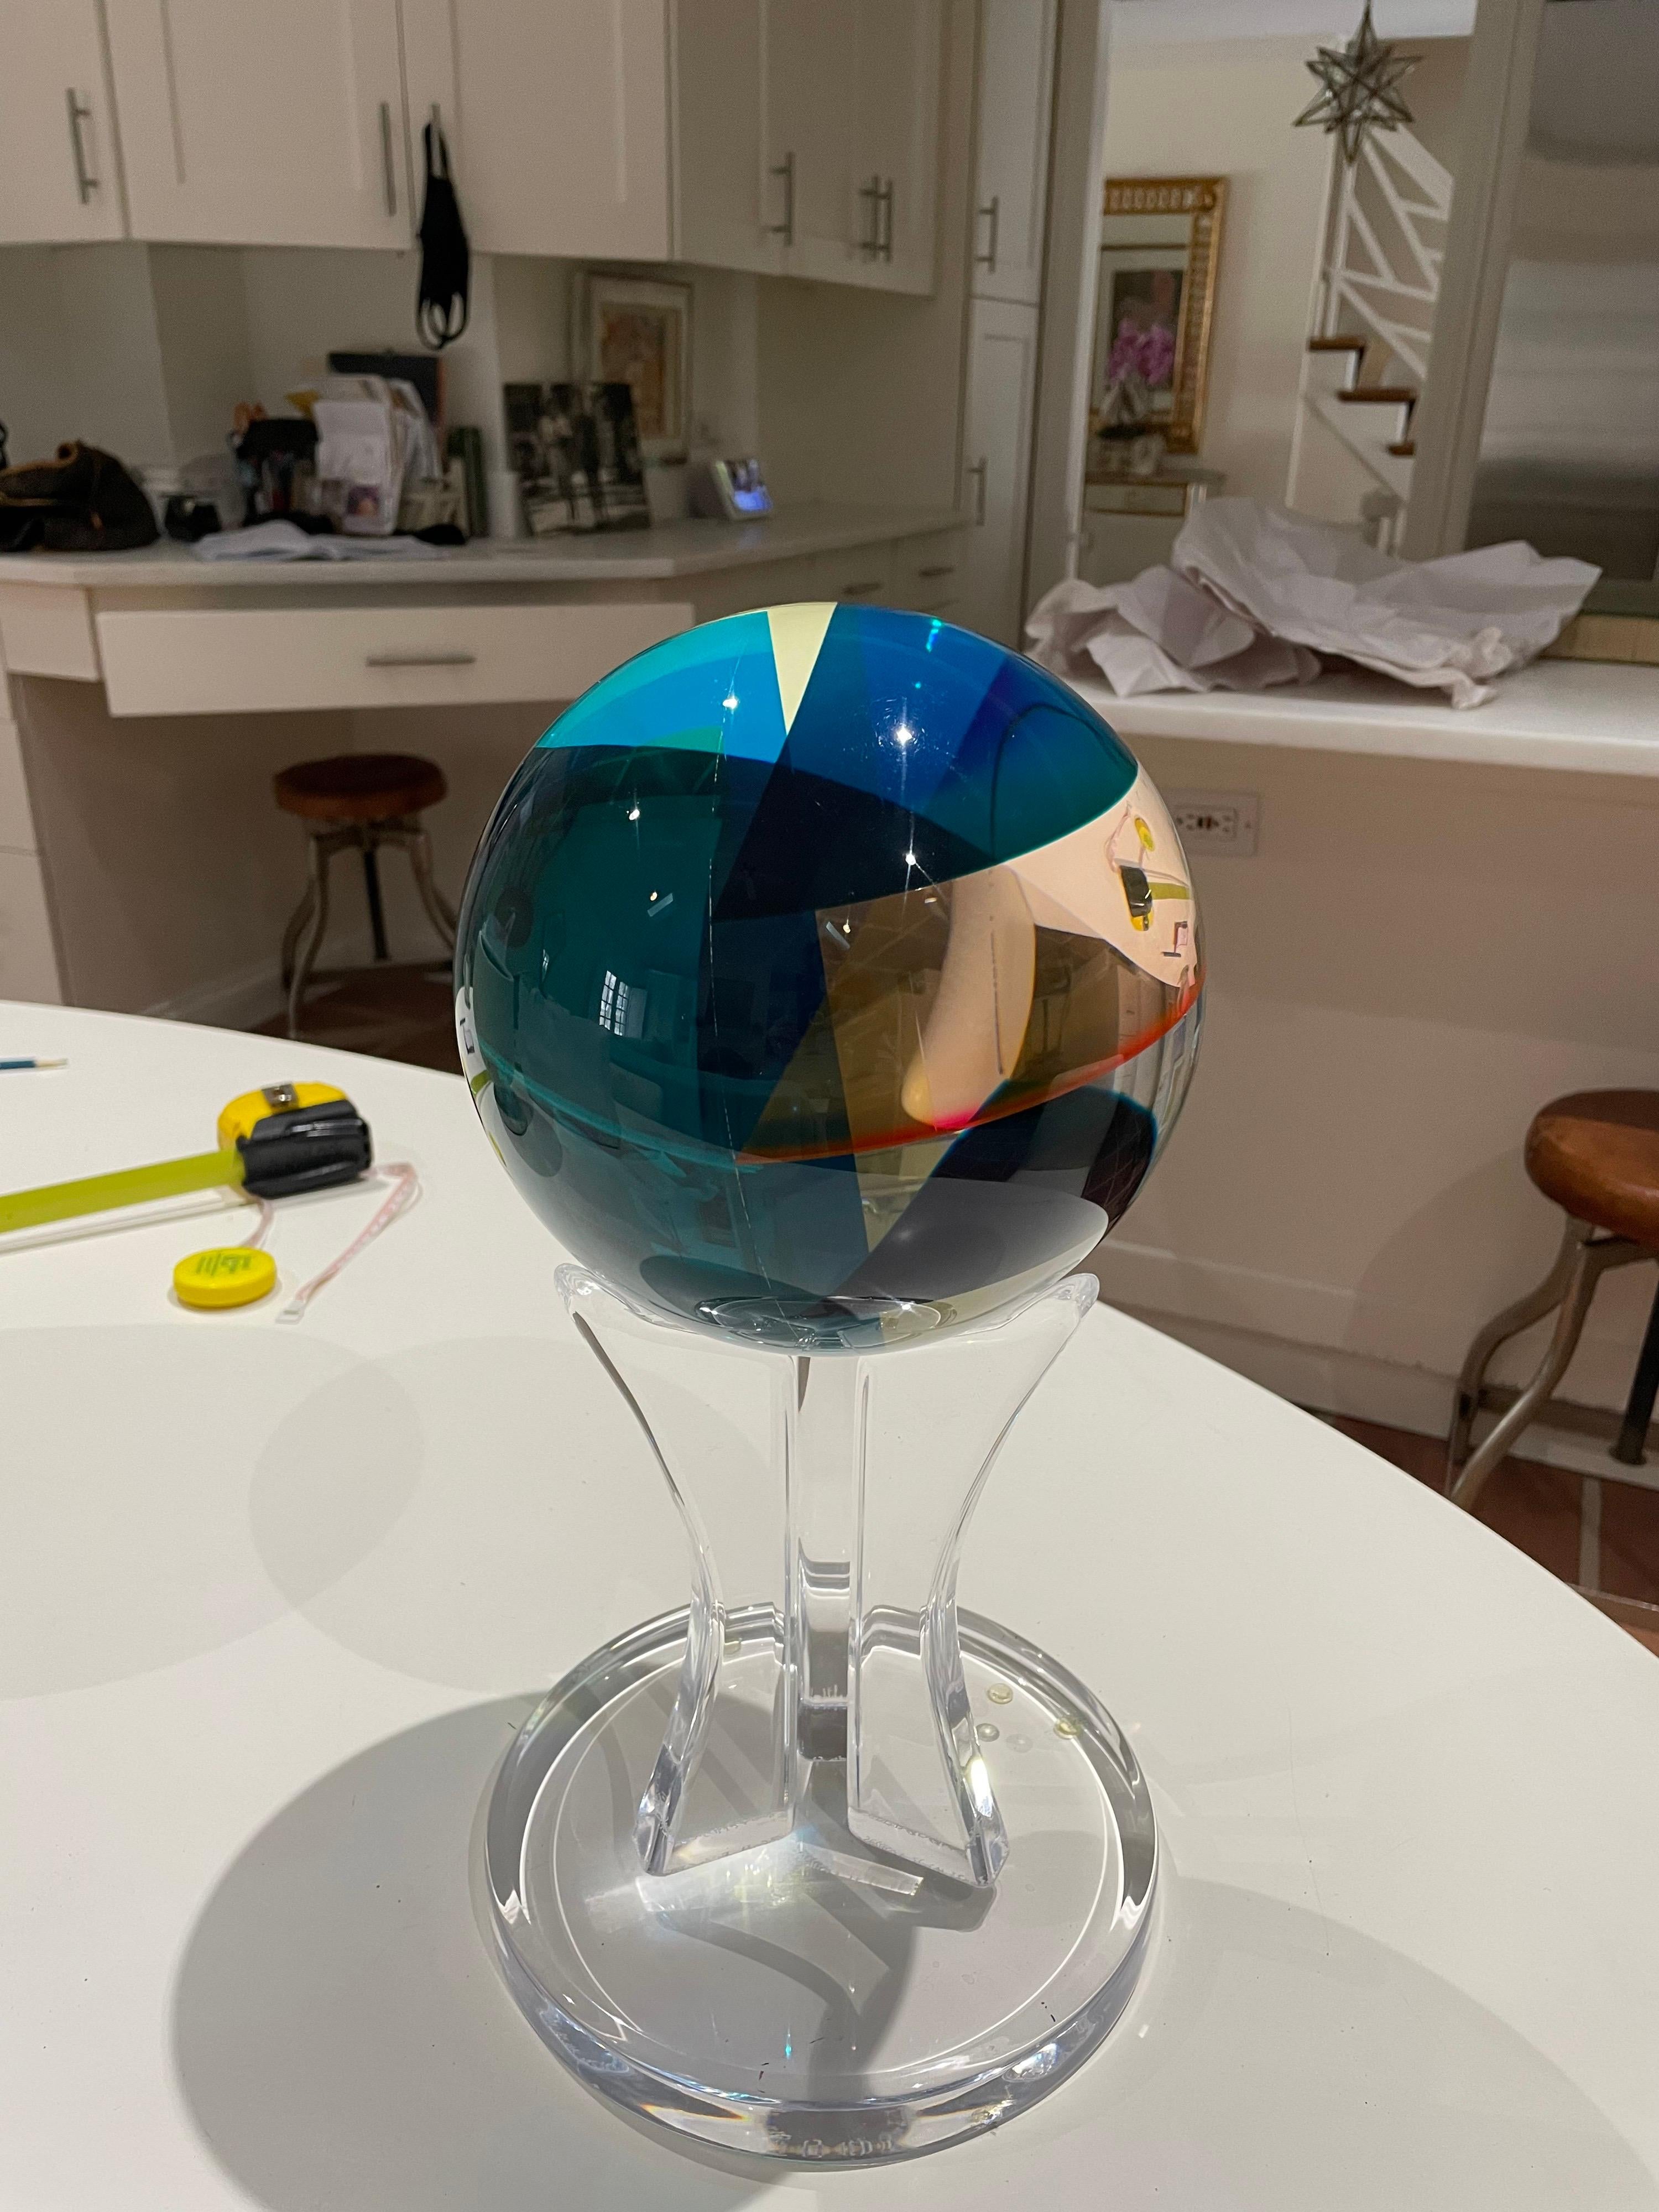 This is a wonderful colorful lucite sphere ,that changes colors depending on light and position of sphere . It is signed on the orb itself . 
This piece was made by Shlomi Haziza no date but probably 80/90s.